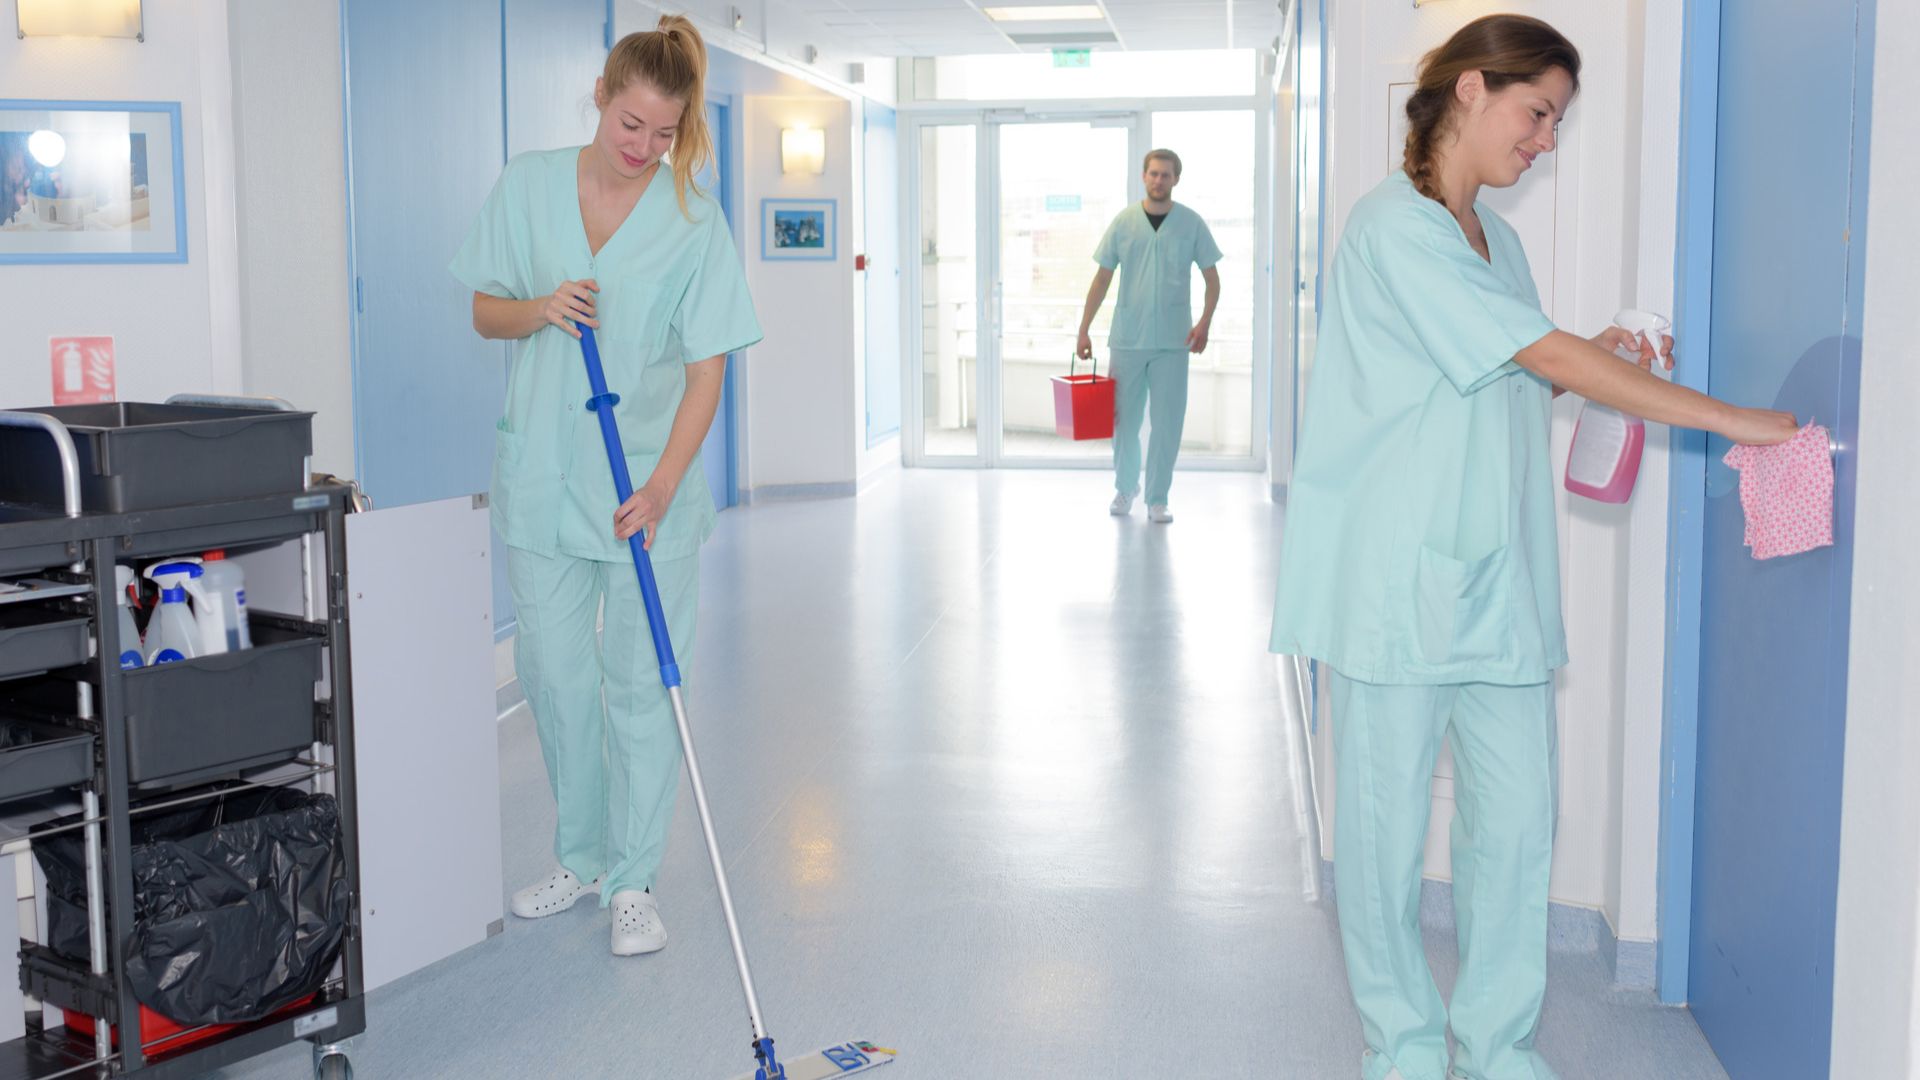 Why Hospital Cleaning Services Are Essential